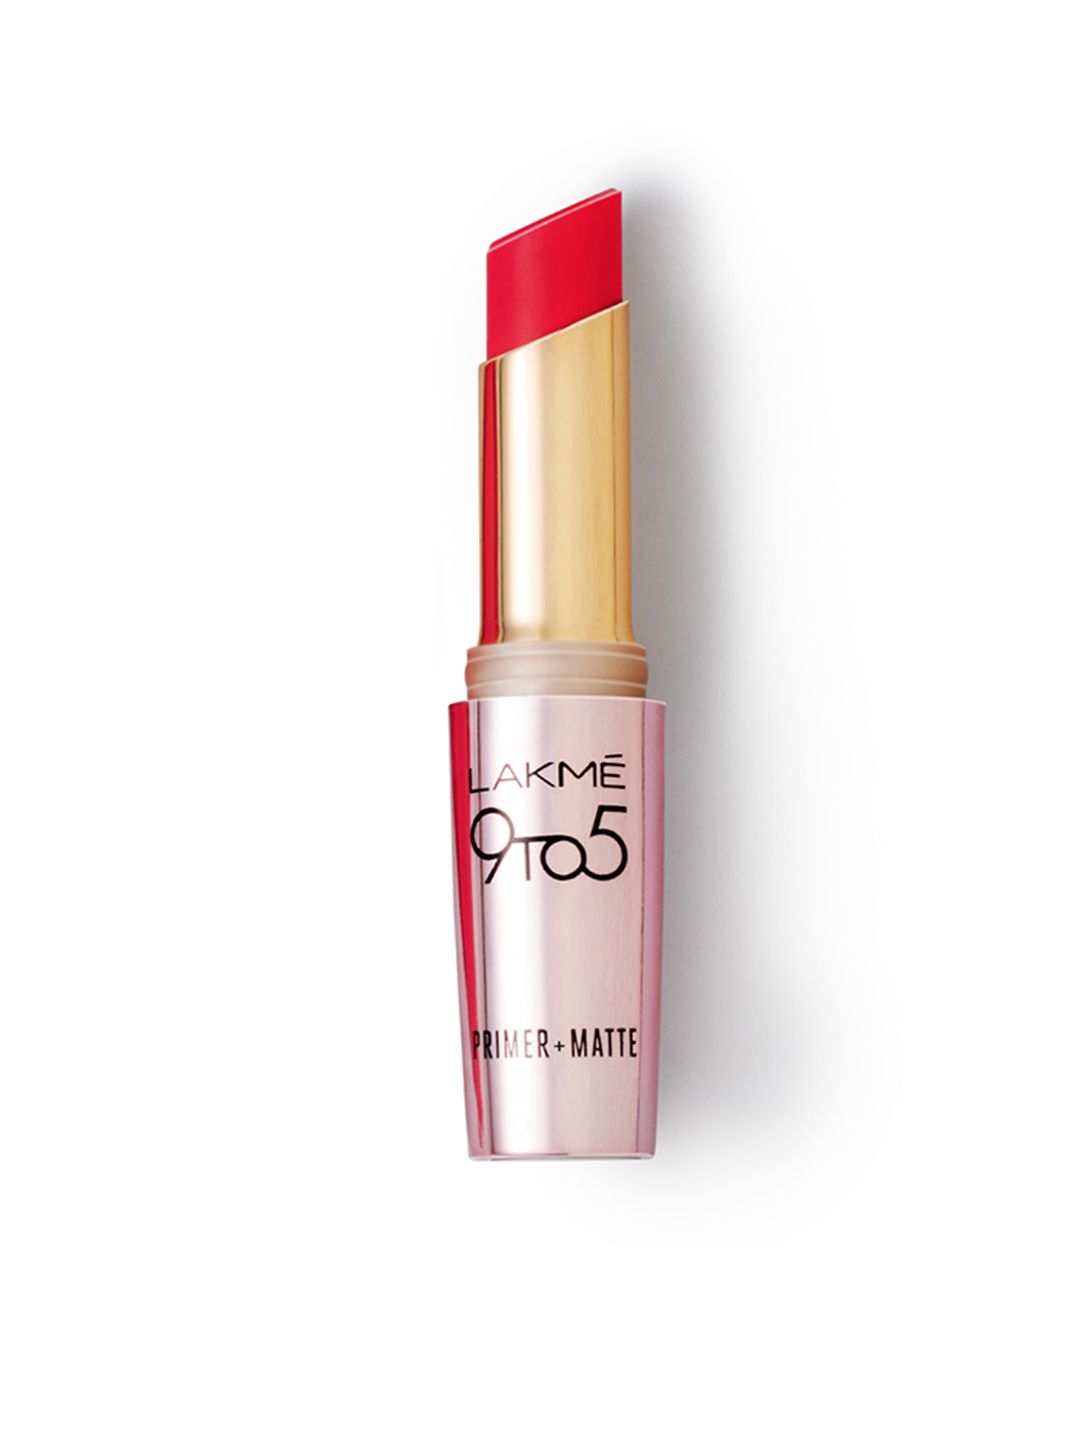 Lakme 9 to 5 Primer + Matte Lip Color - Pink Rose 3.6 g Price in India